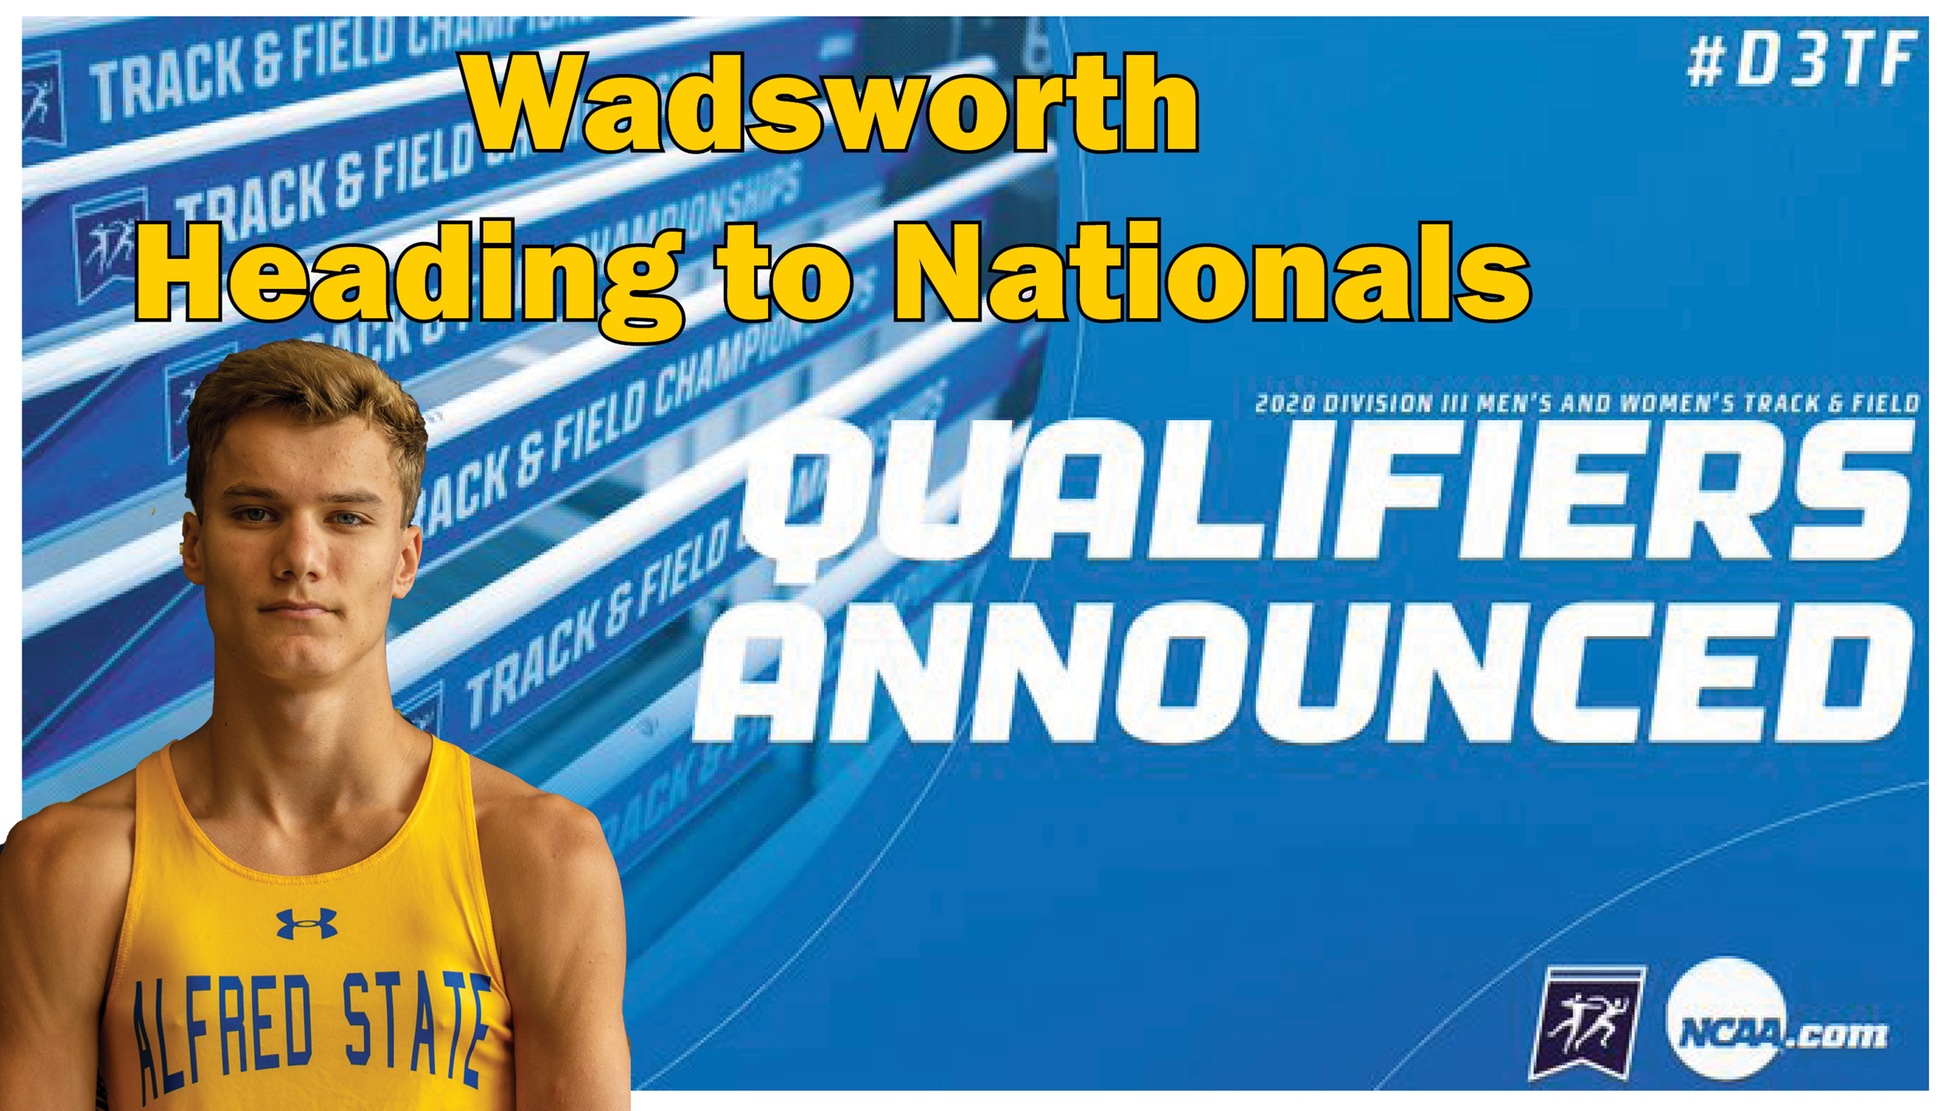 Wadsworth Heading to Nationals